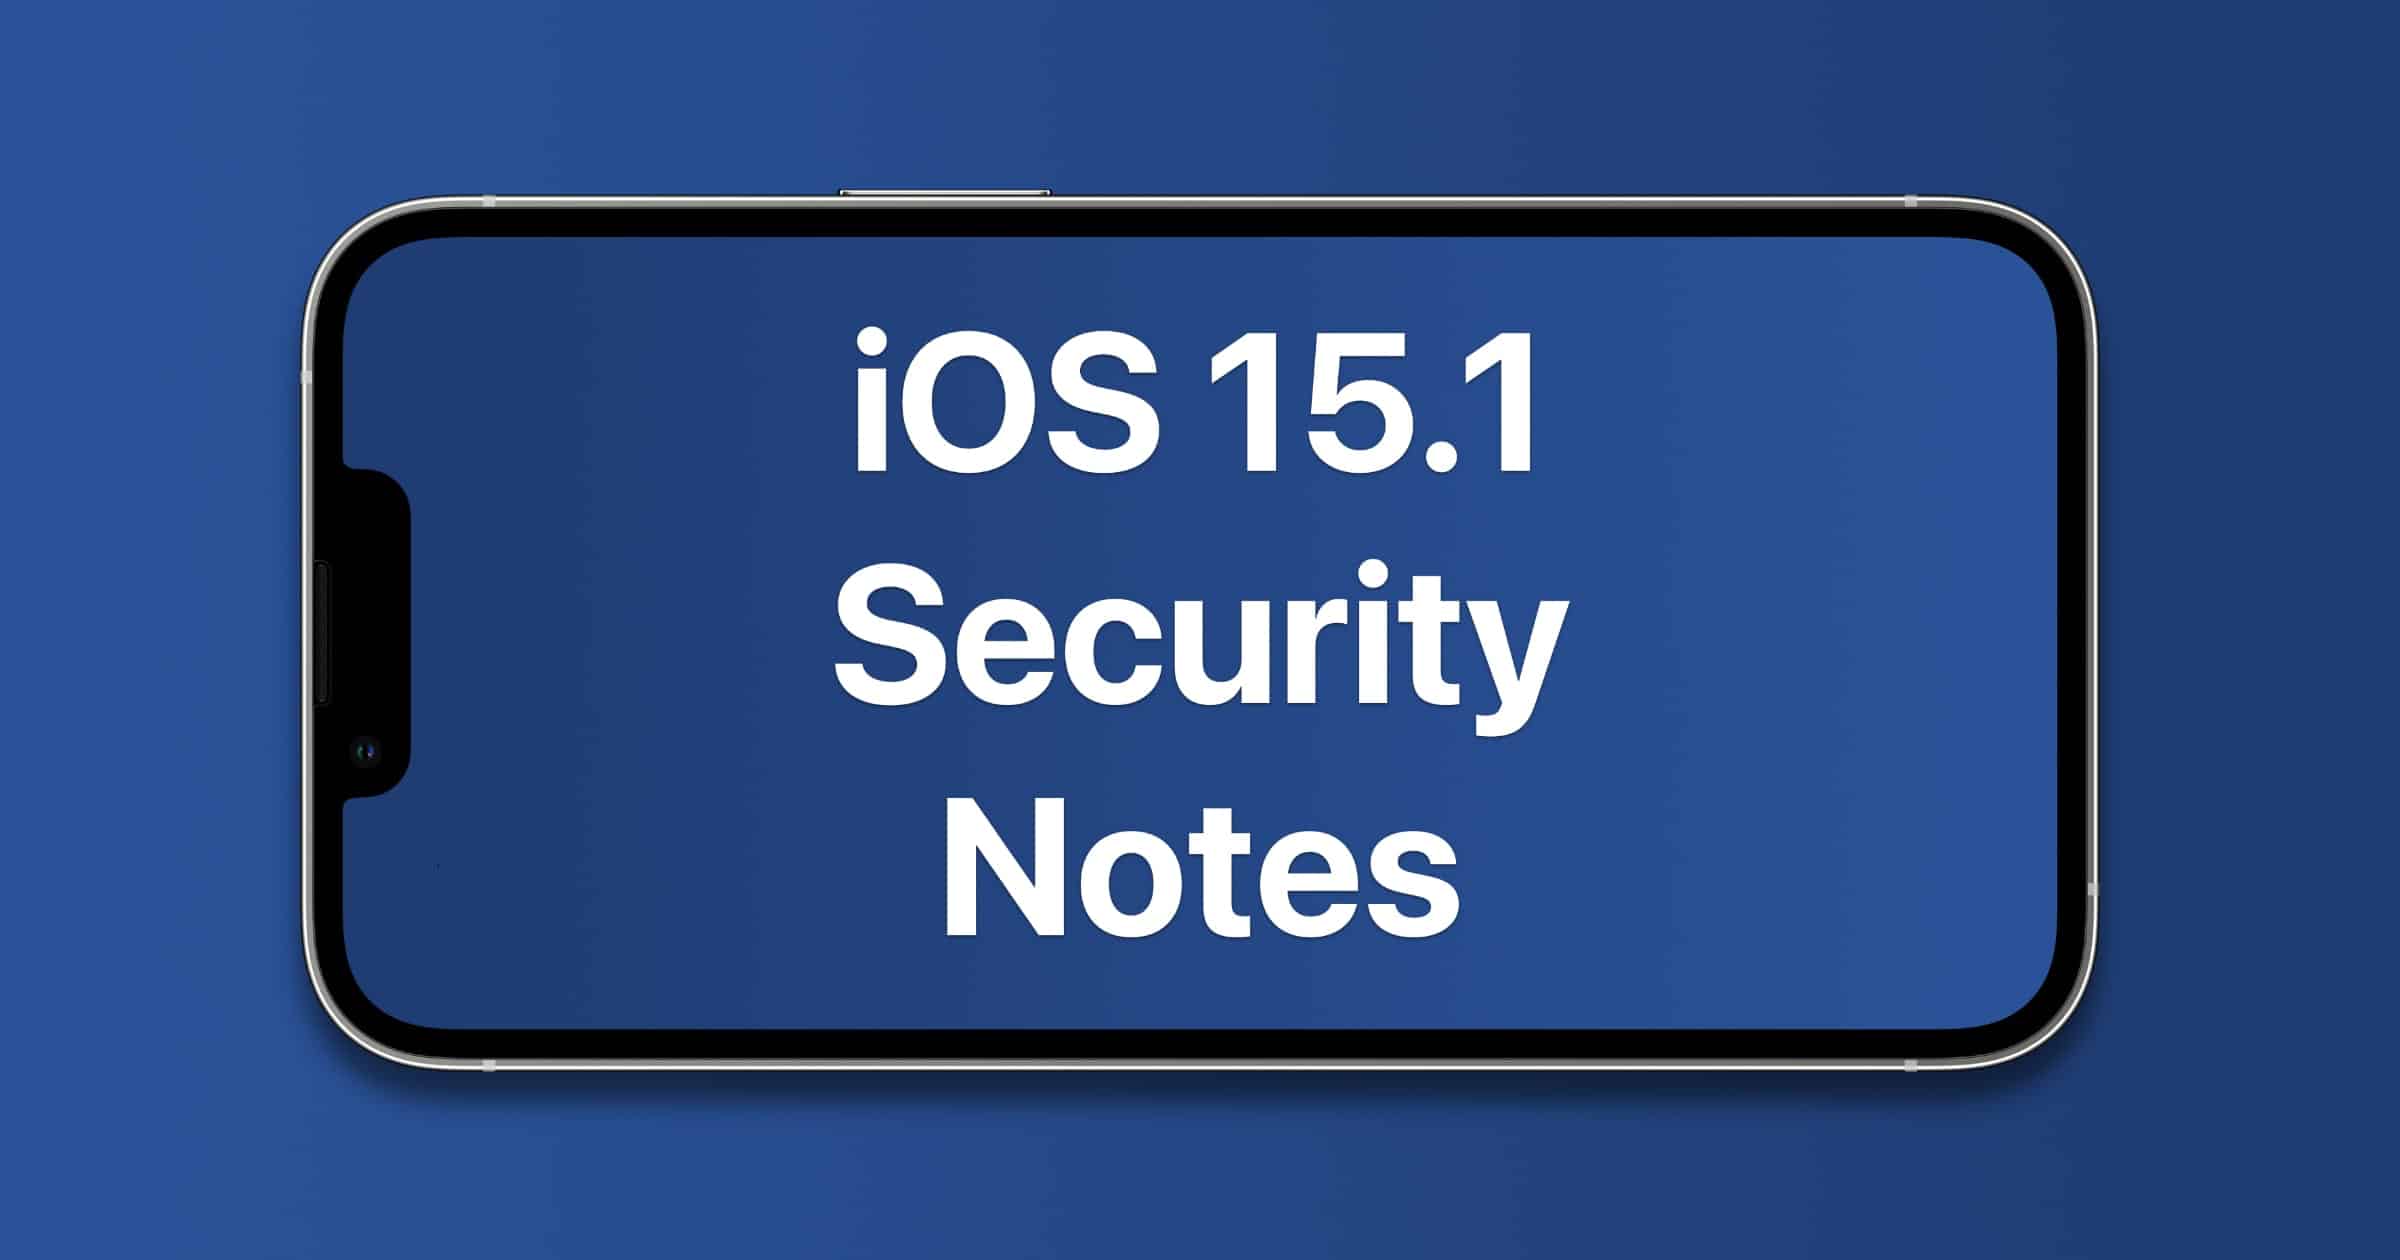 iOS 15.1 security notes